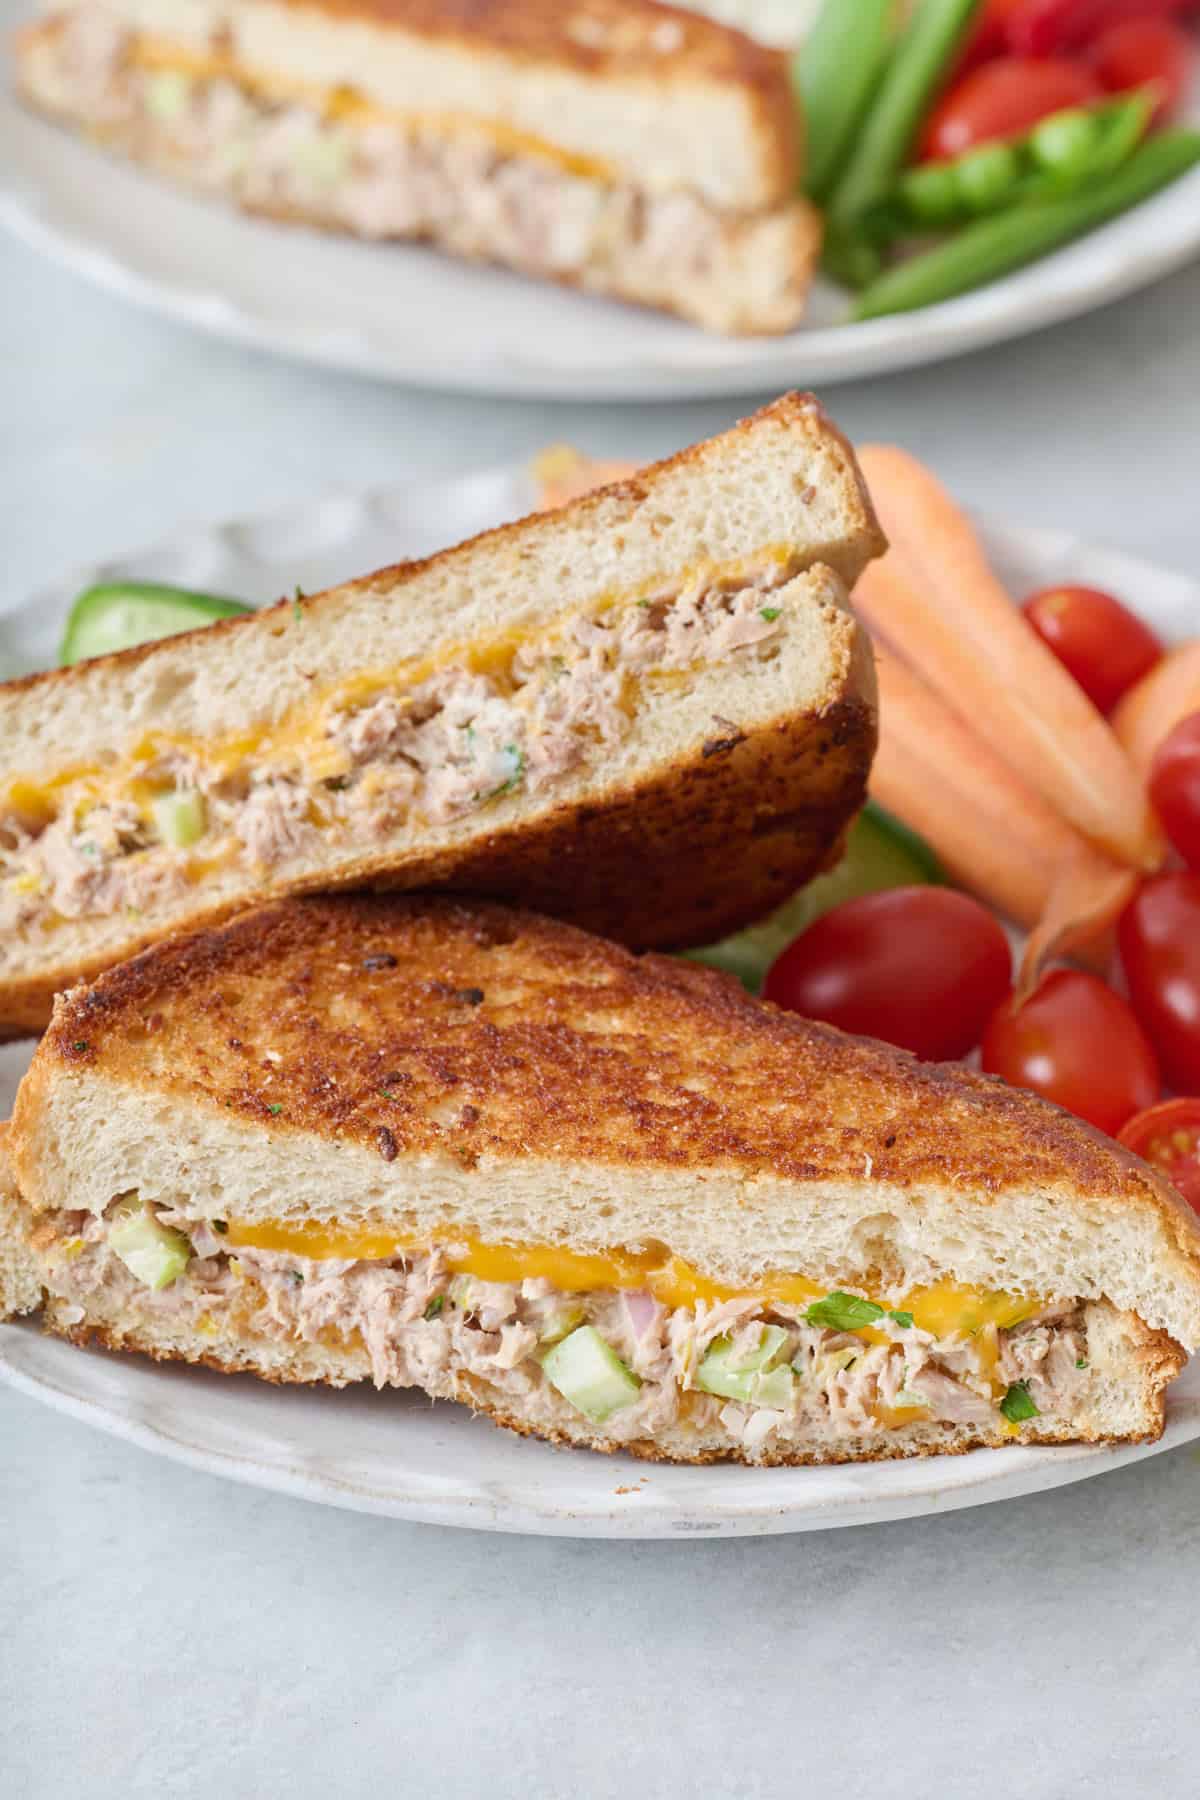 Close up of a tuna melt sandwich cut in half on a plate with veggies.